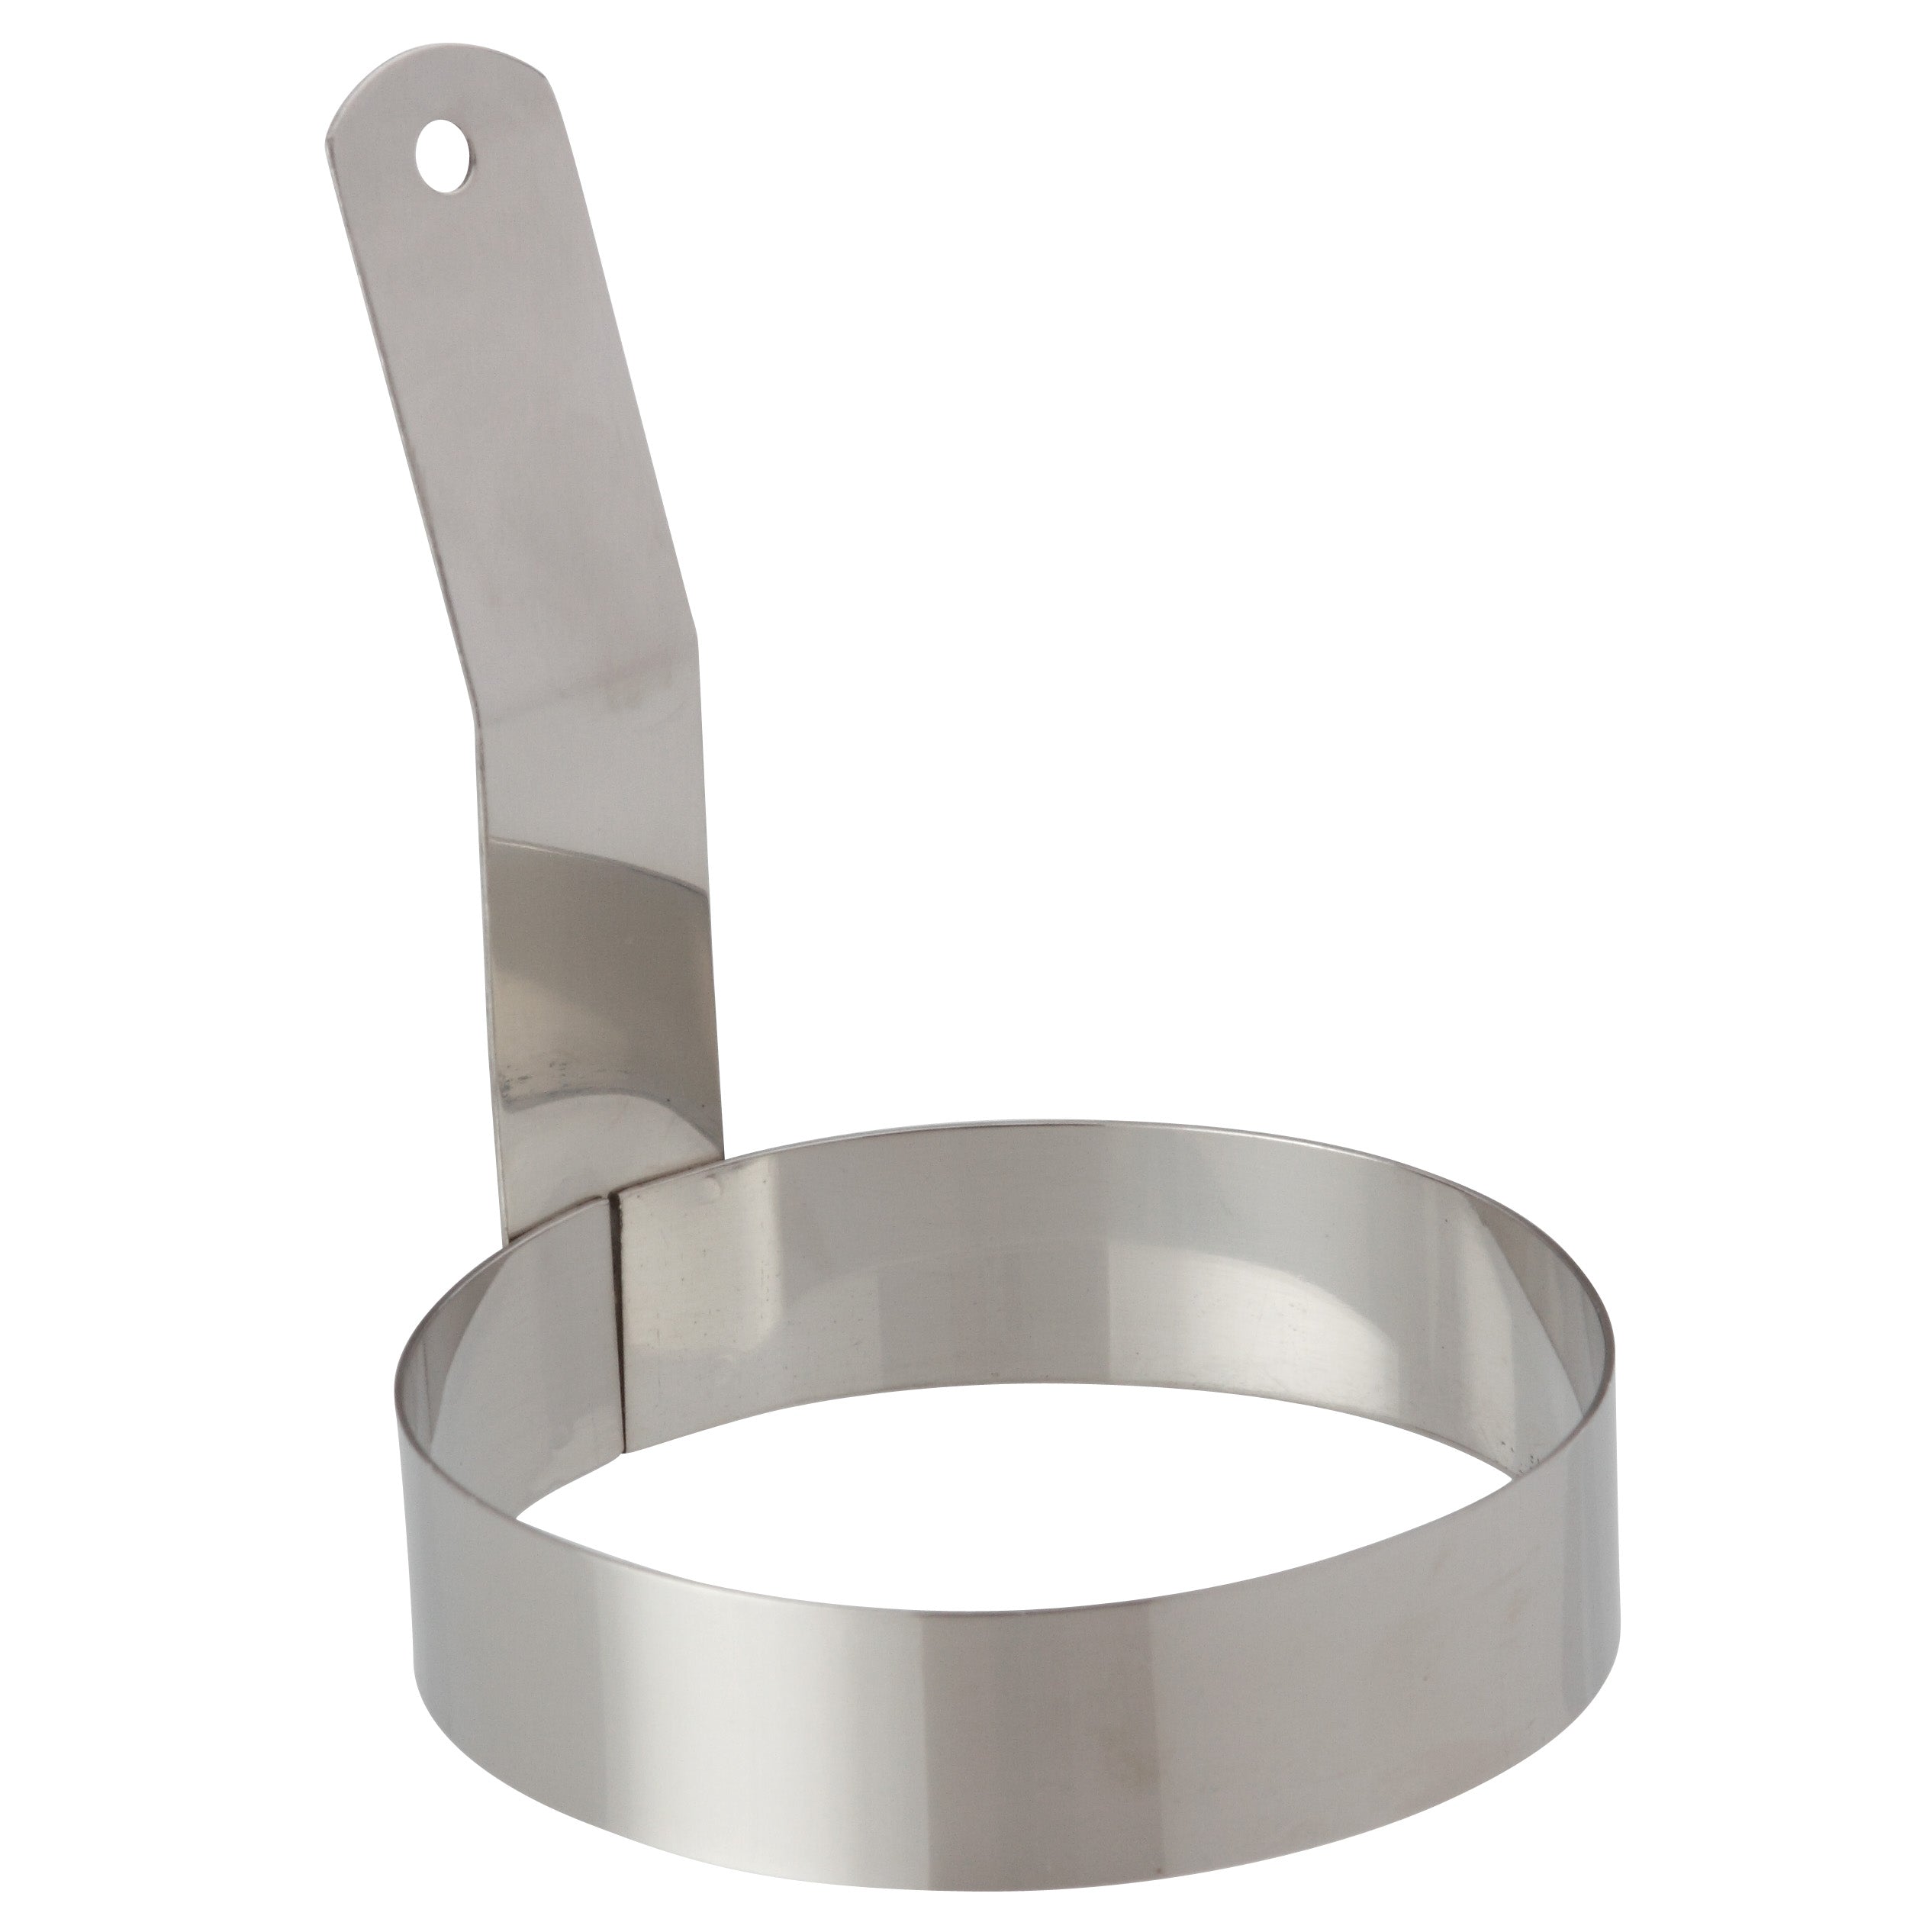 Royal Industries Round Stainless Steel Egg Ring